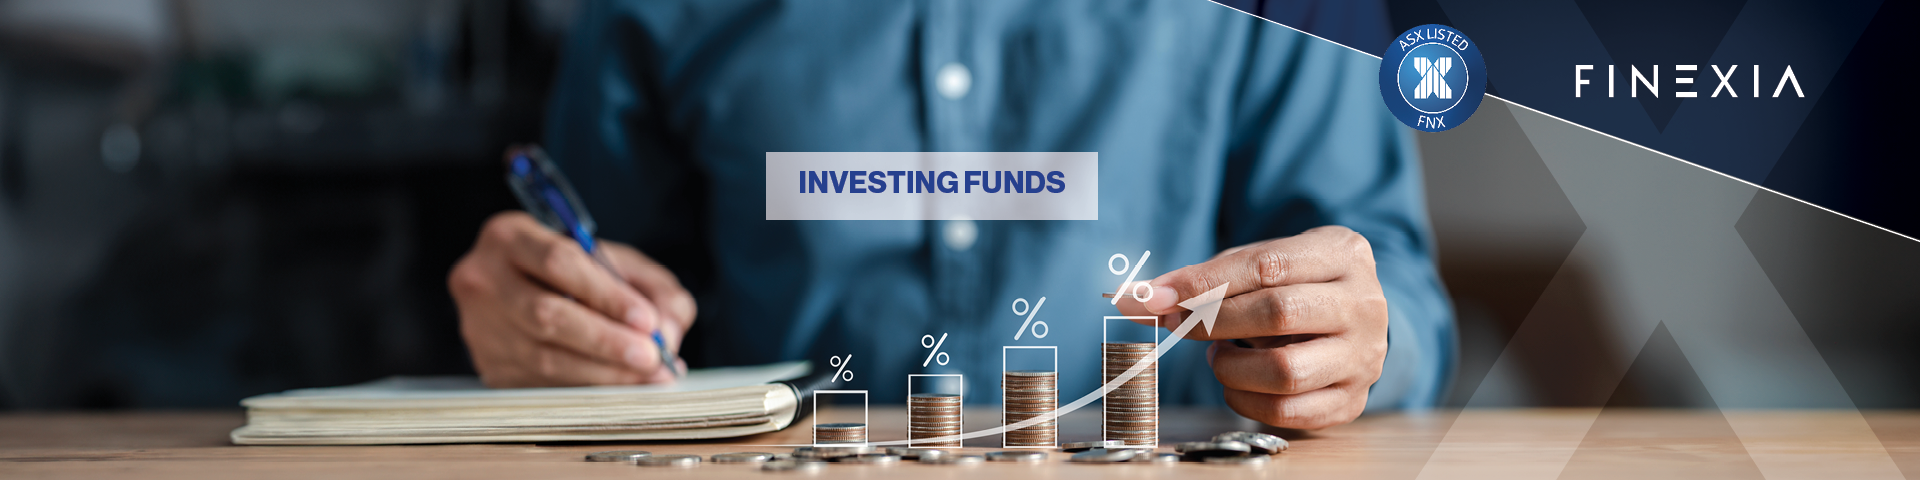 Investing Funds